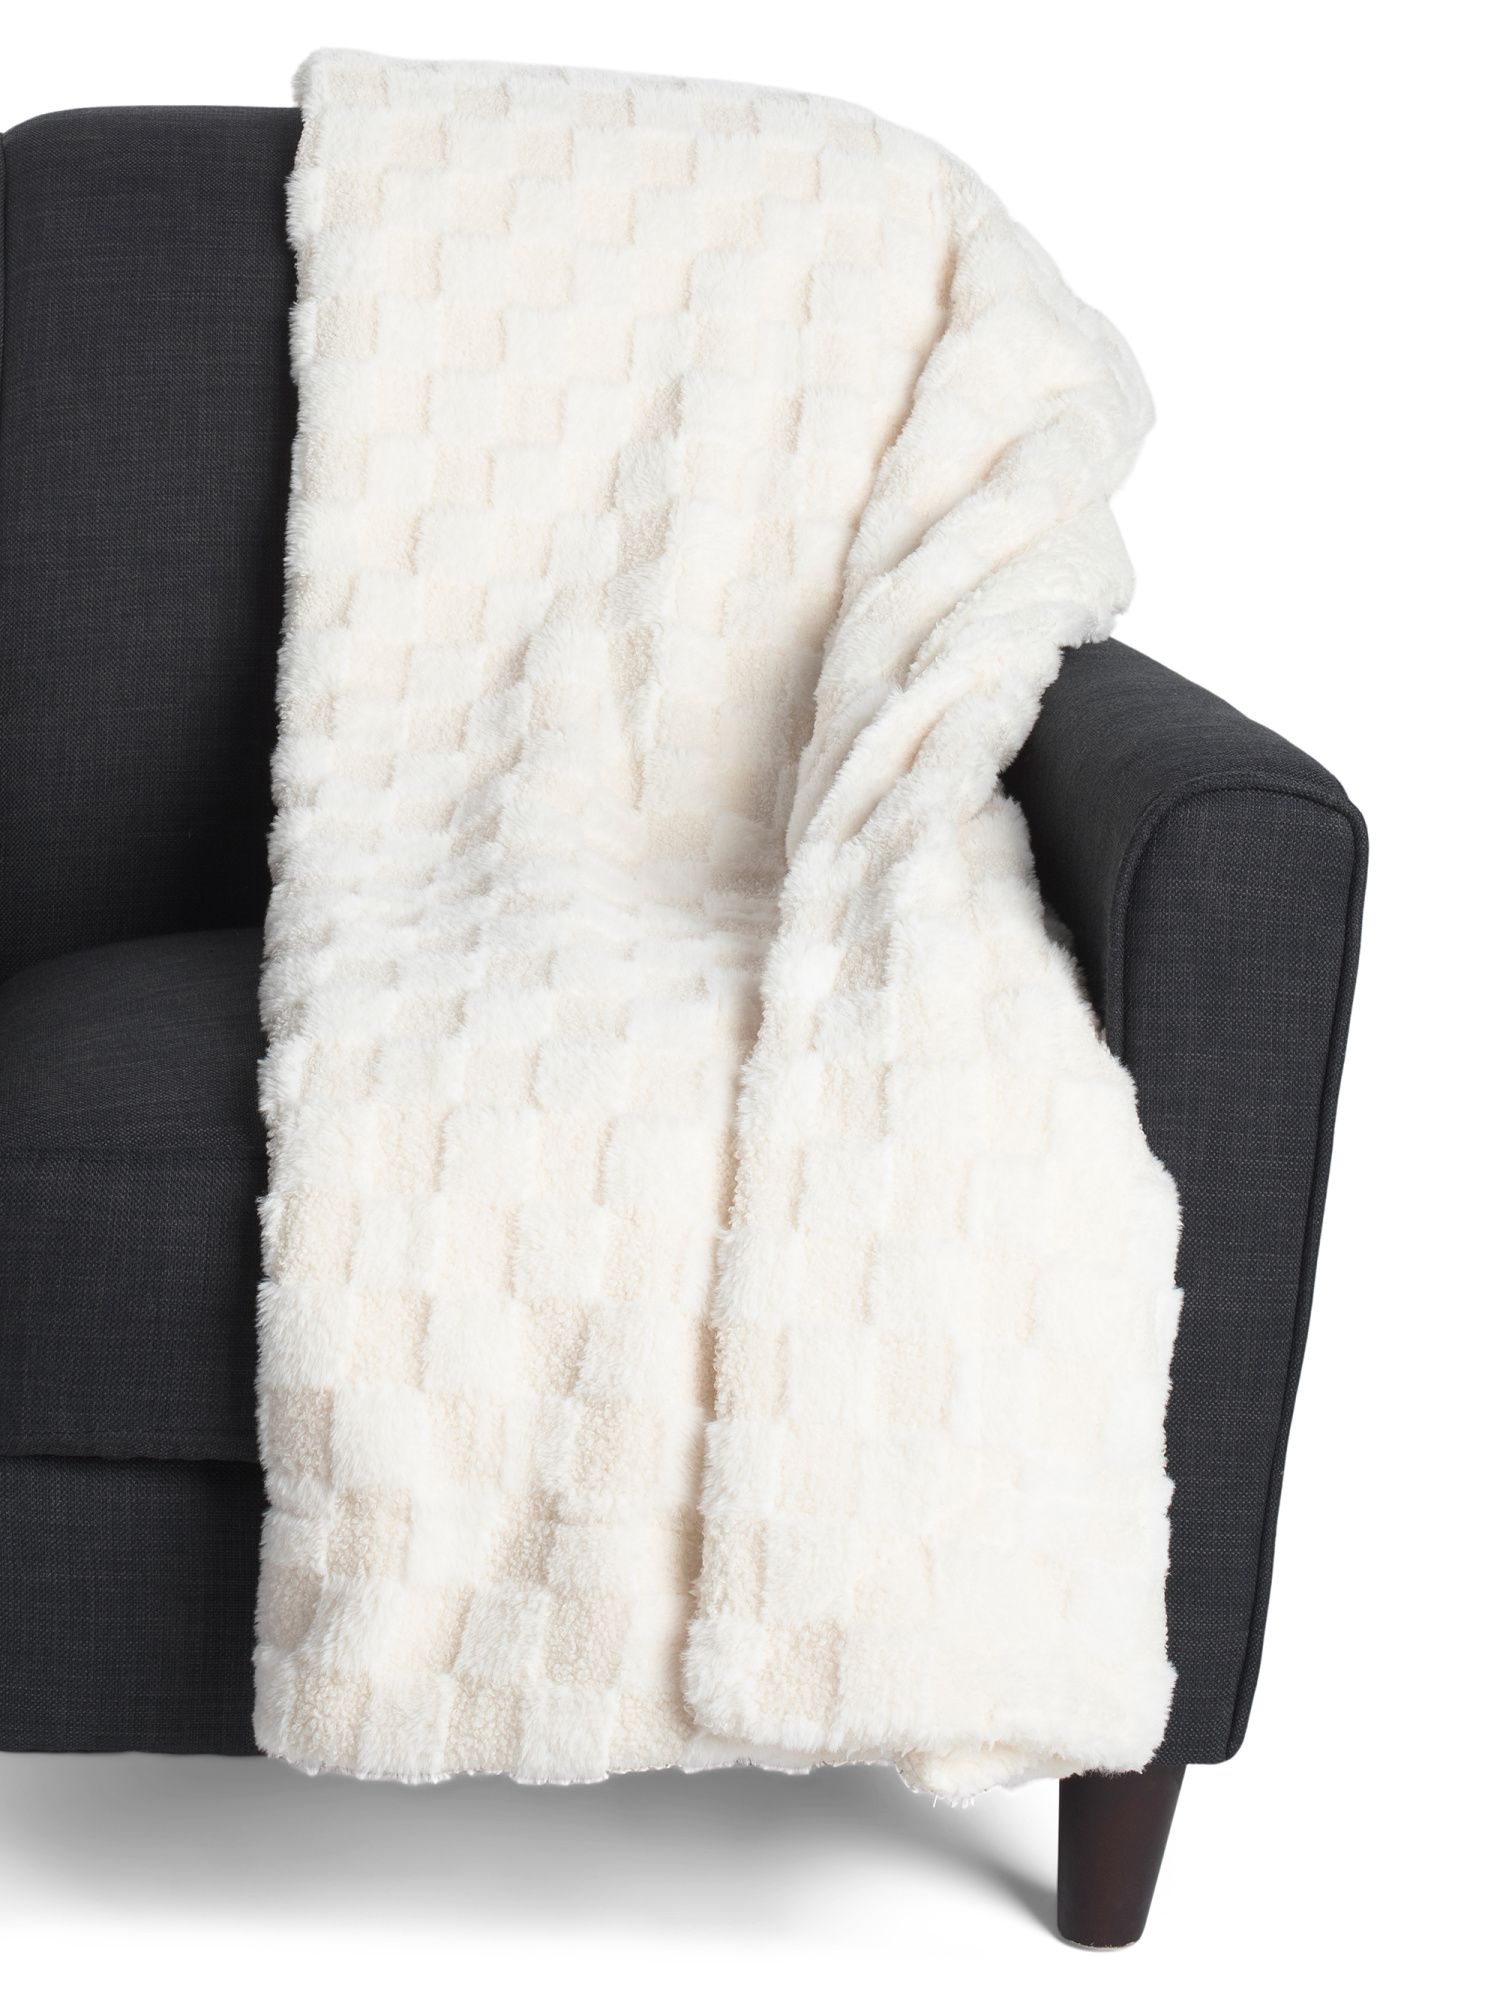 Checkerboard Throw With Sherpa Back | Marshalls